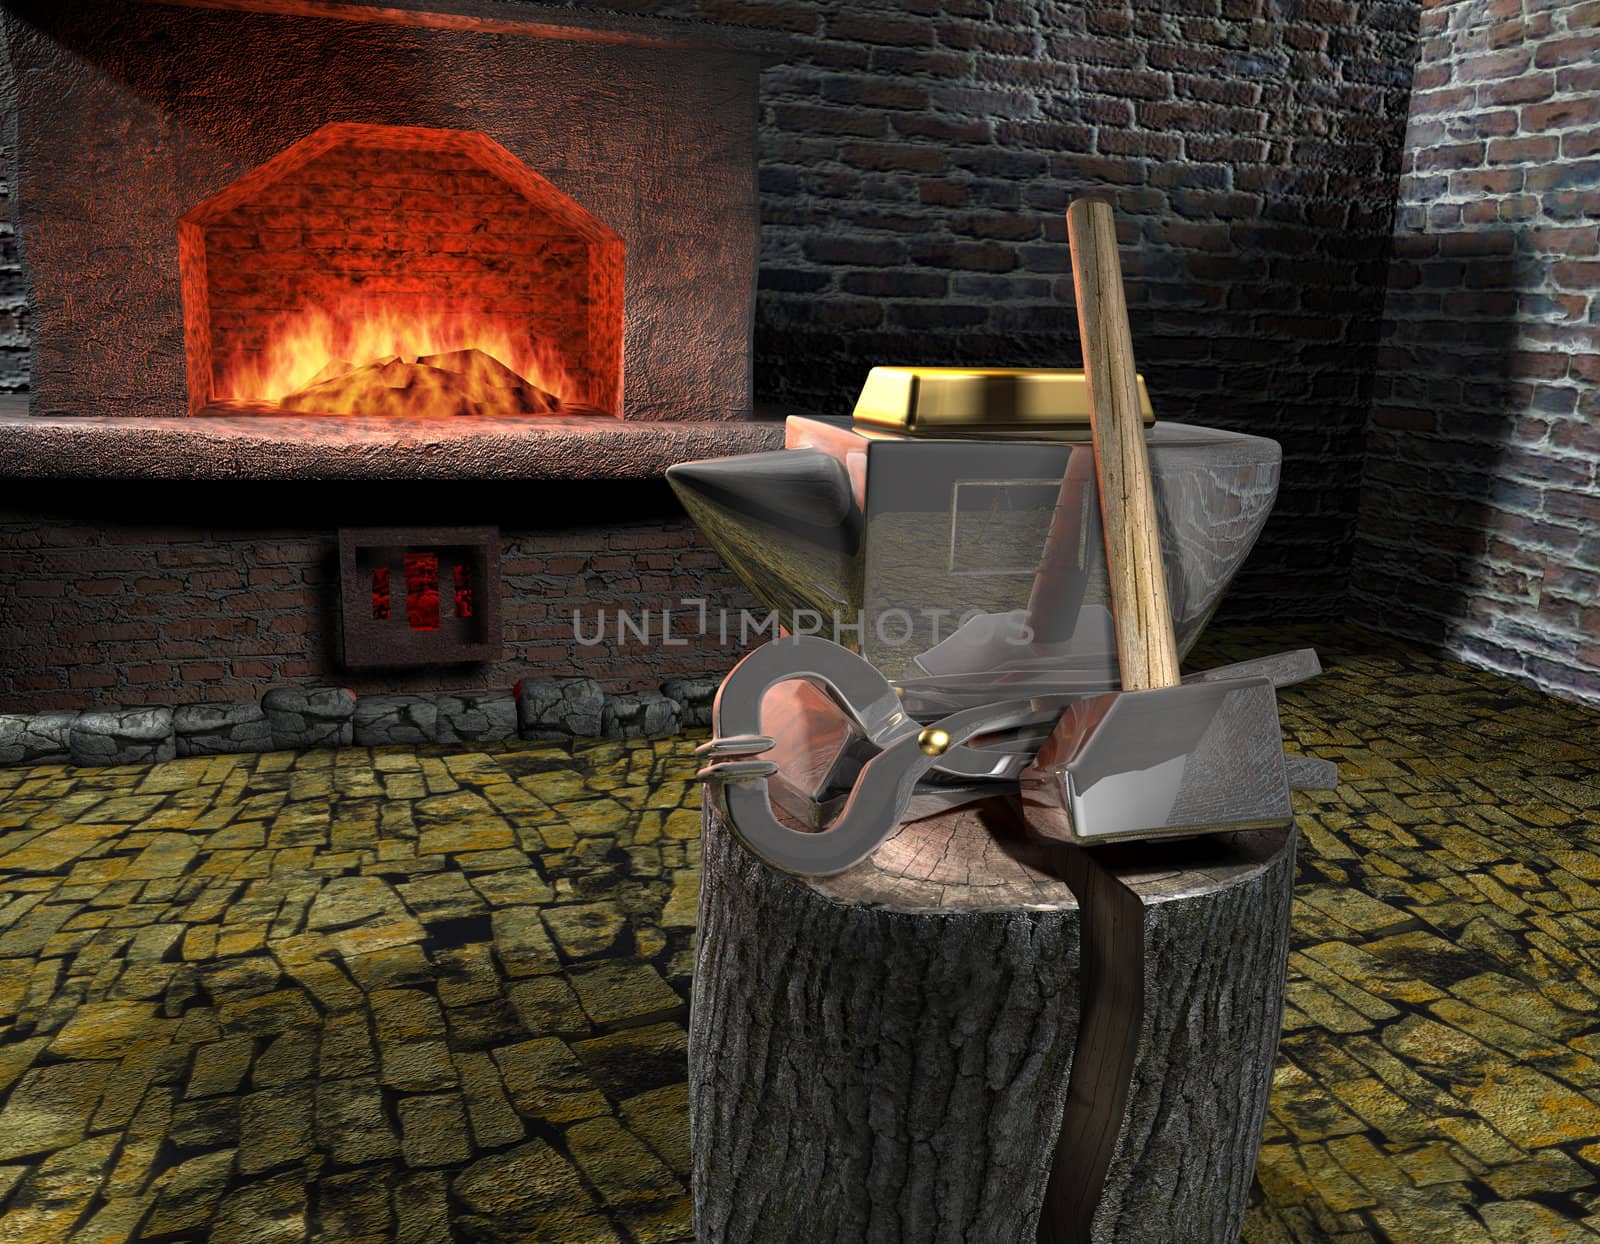 Gold Bar is on the anvil. The anvil is made of silver. Against the backdrop of a forge and fire.